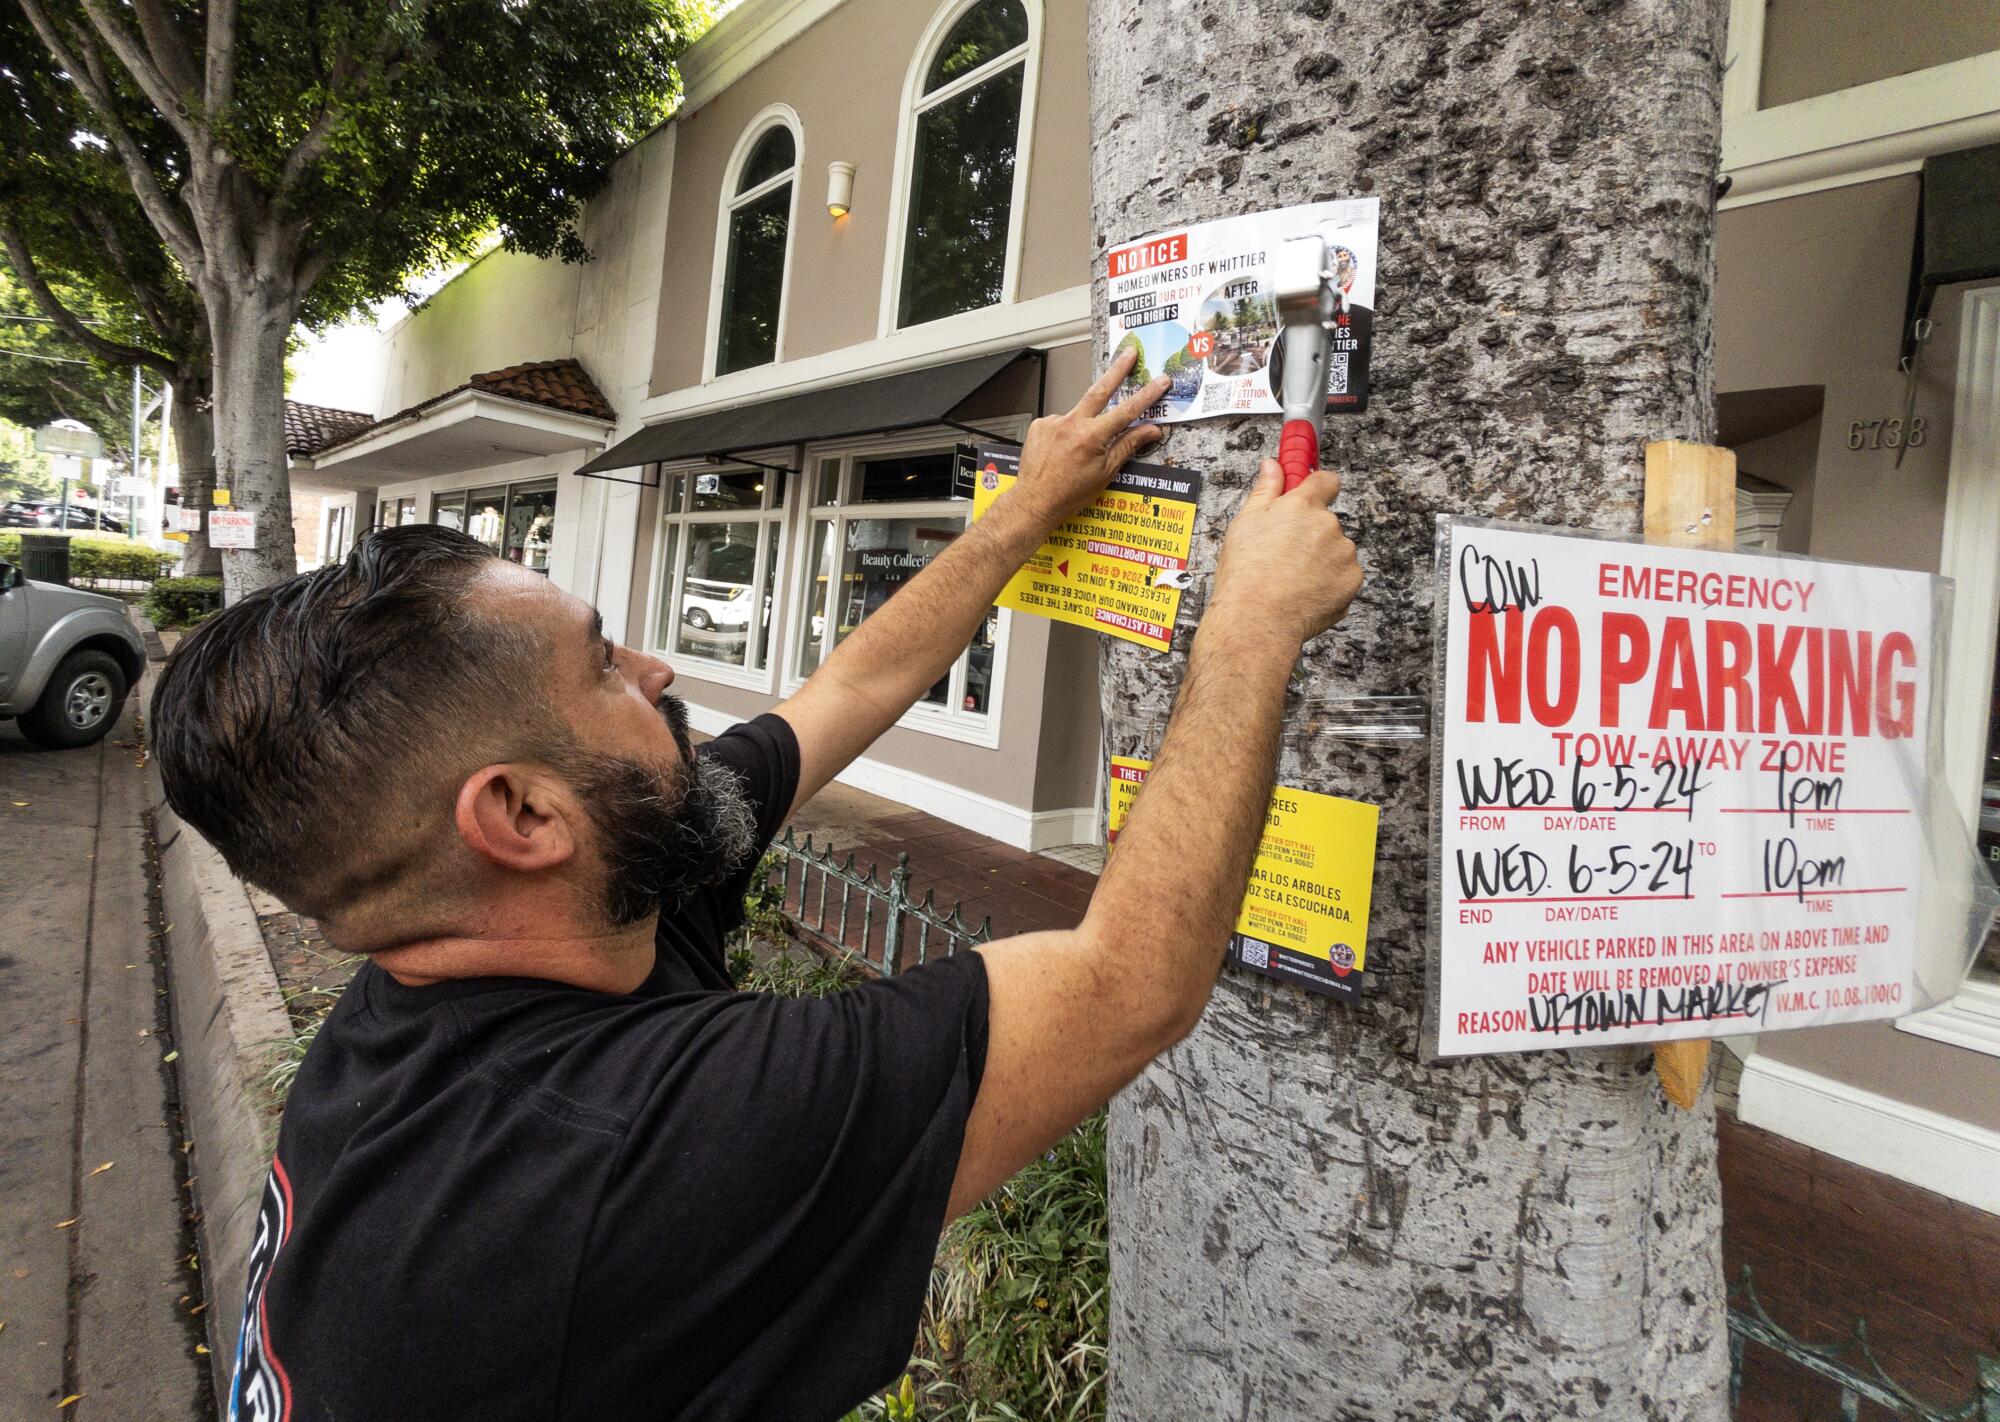 A person puts a sign on a tree.